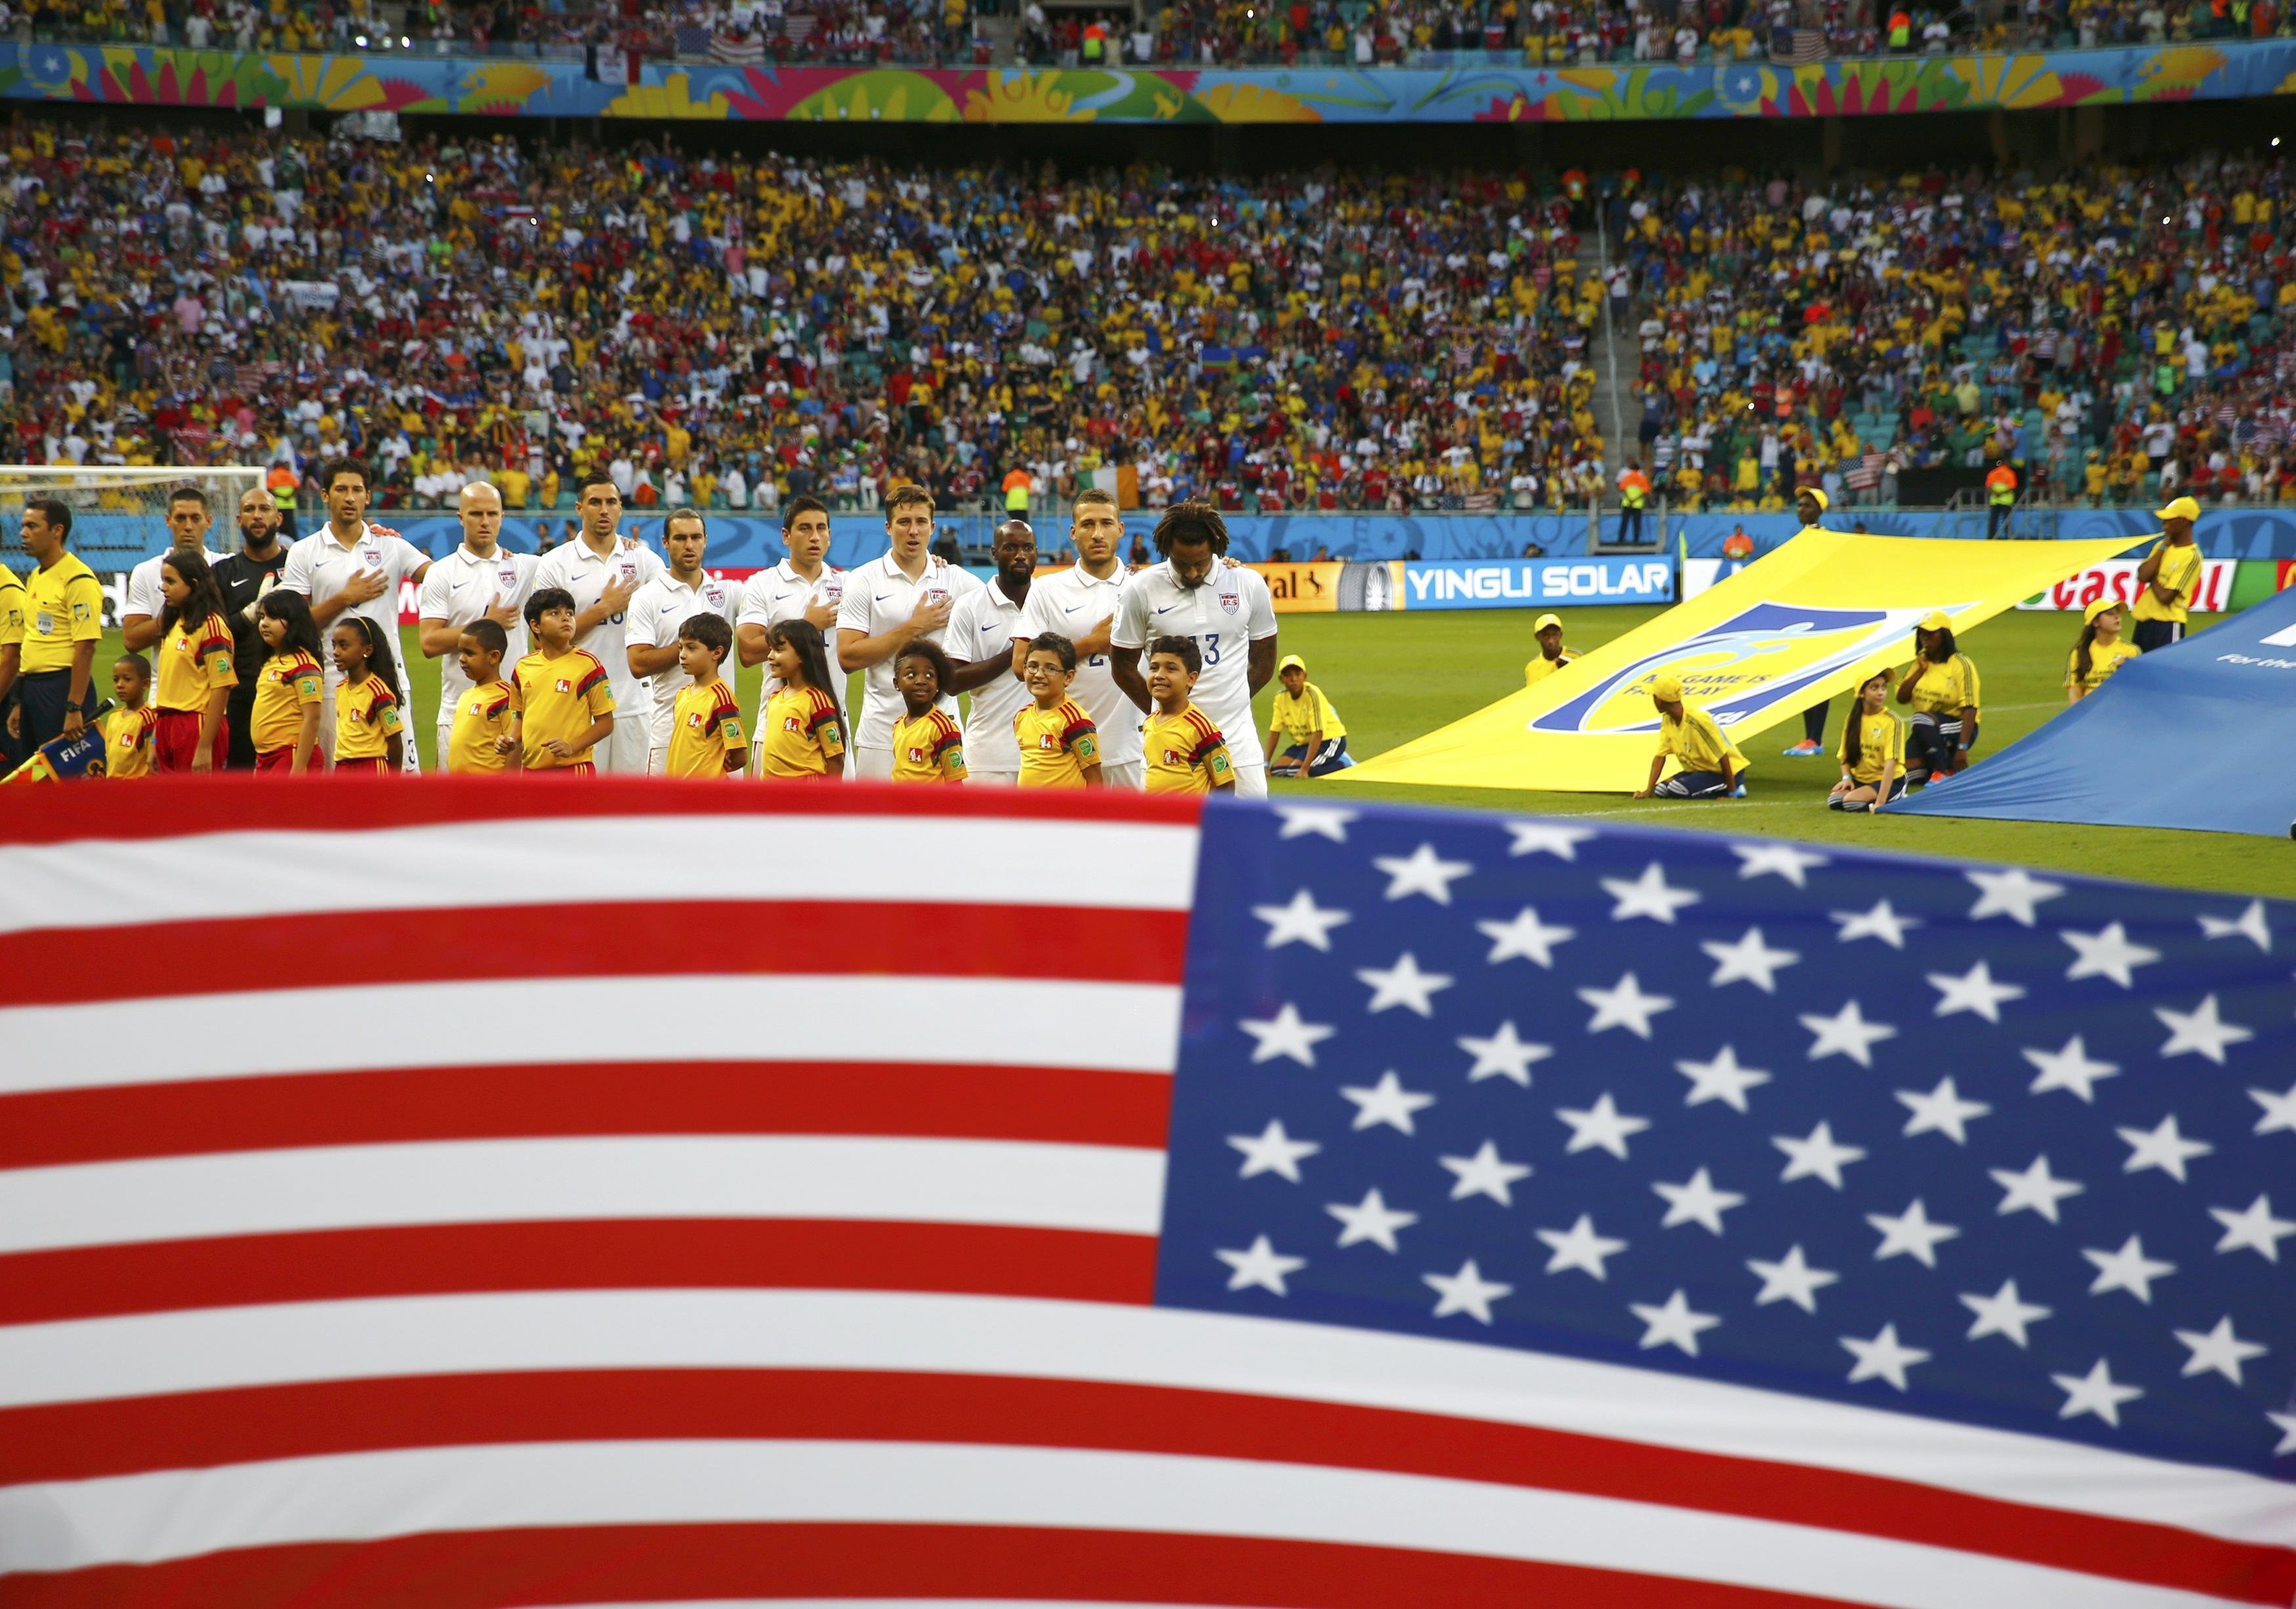 U.S. players sing the anthem before the game between Belgium and the U.S. at the Fonte Nova arena in Salvador, Brazil on July 1, 2014.